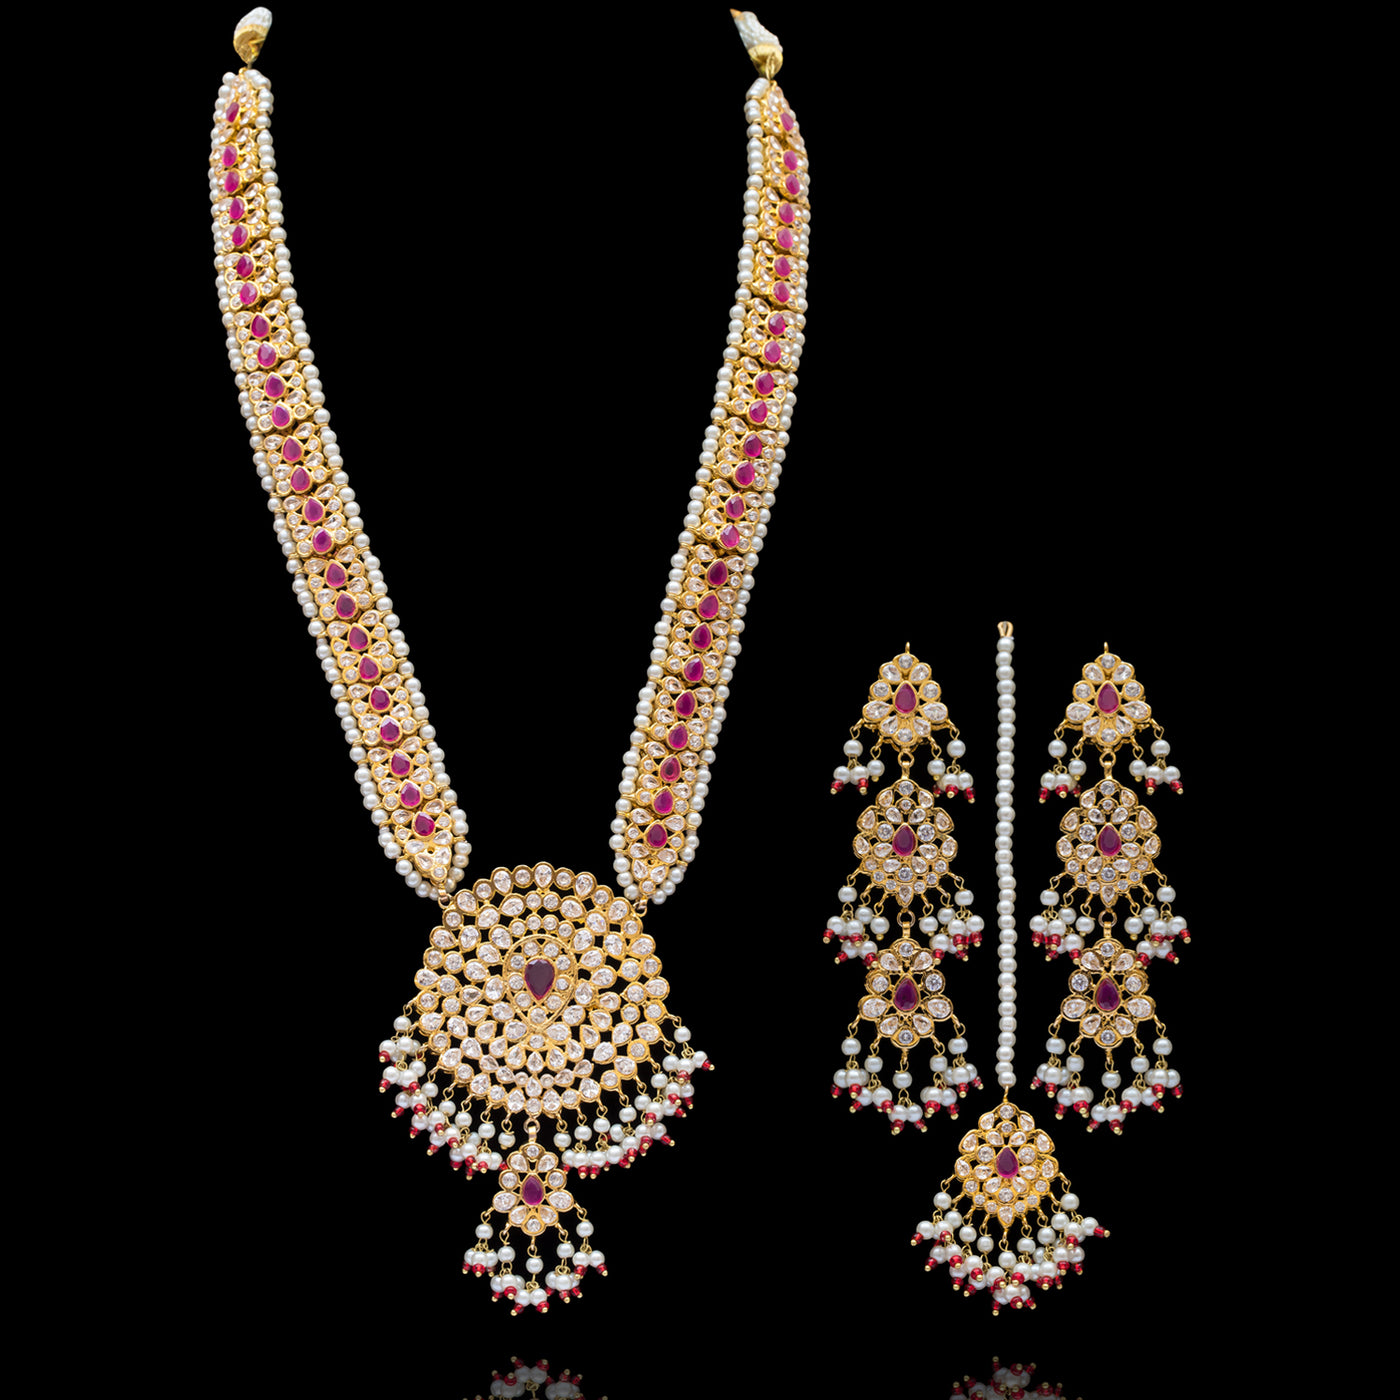 Rabiah Set Ruby - Available in 3 Options